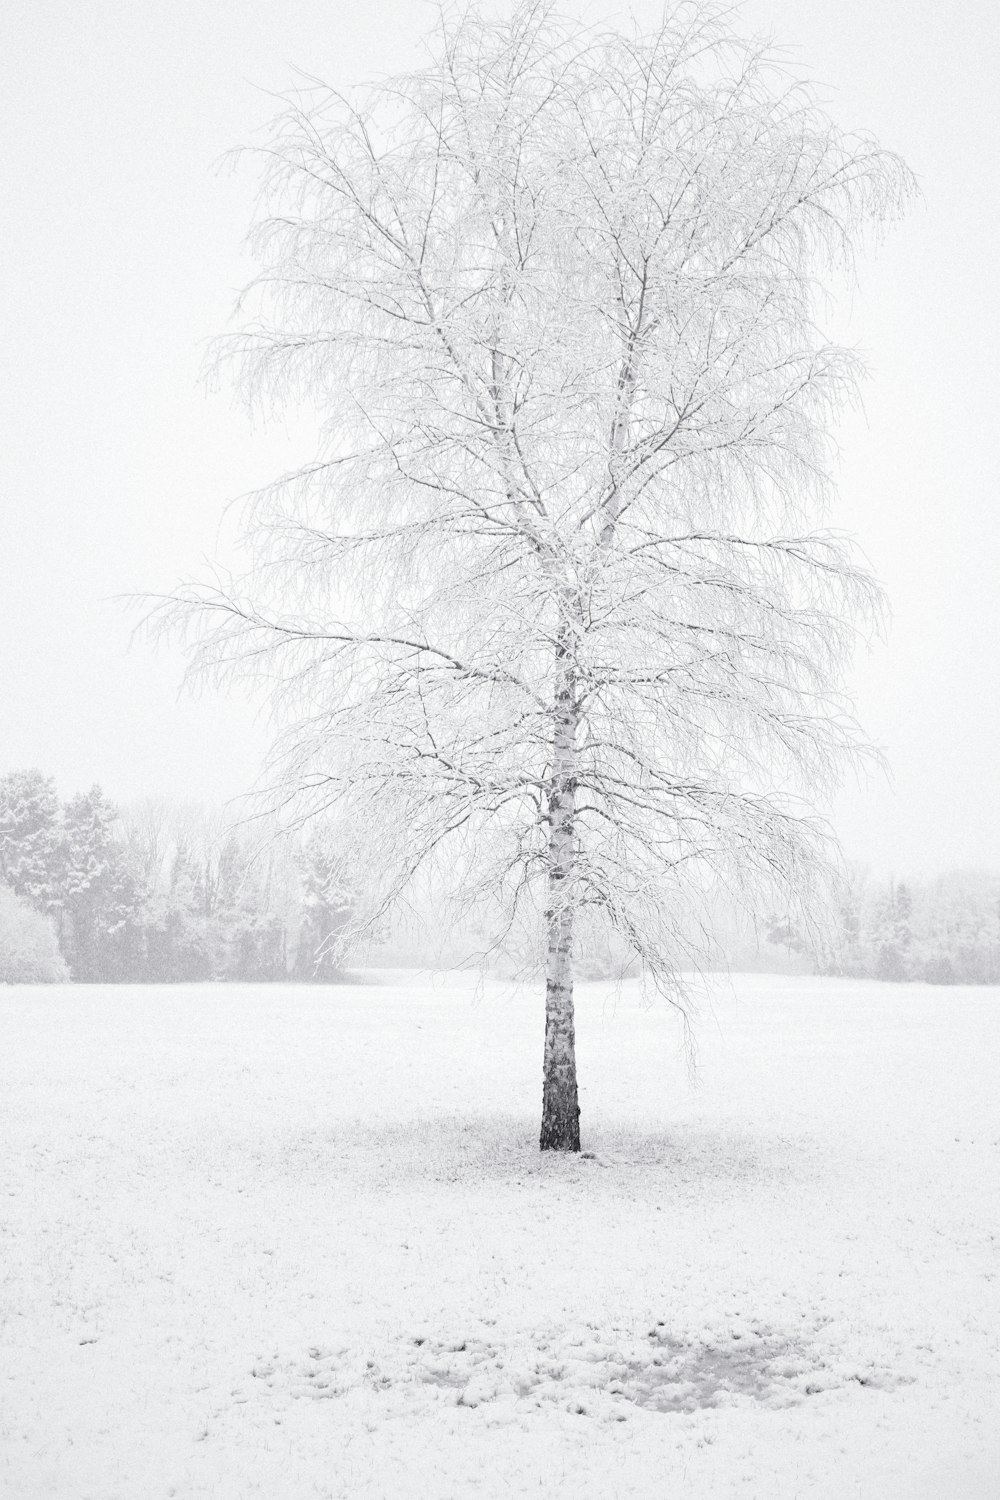 a lone tree stands in a snowy field